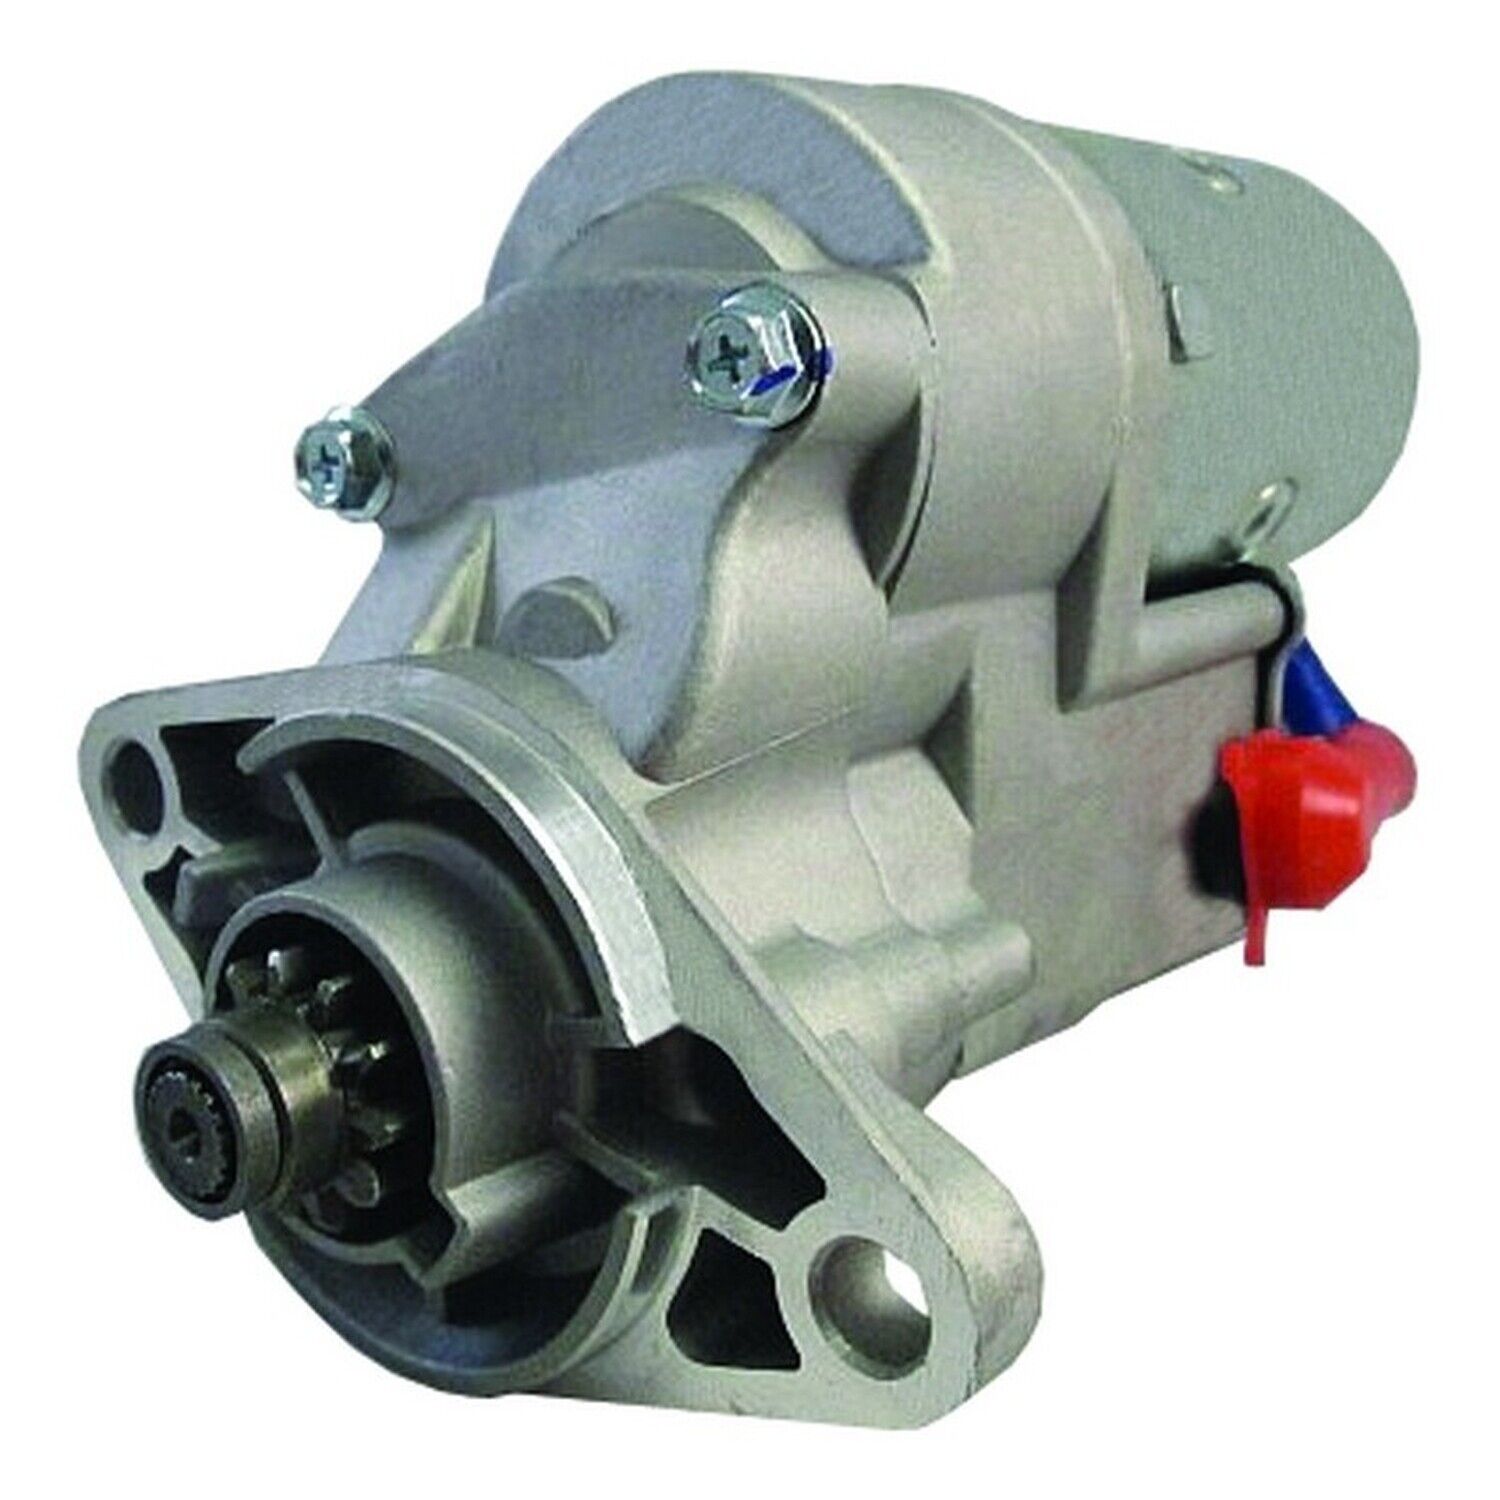 New Starter For Airboat Applications 12V 2.0KW 11 Tooth, SND0699 8019094 9019094